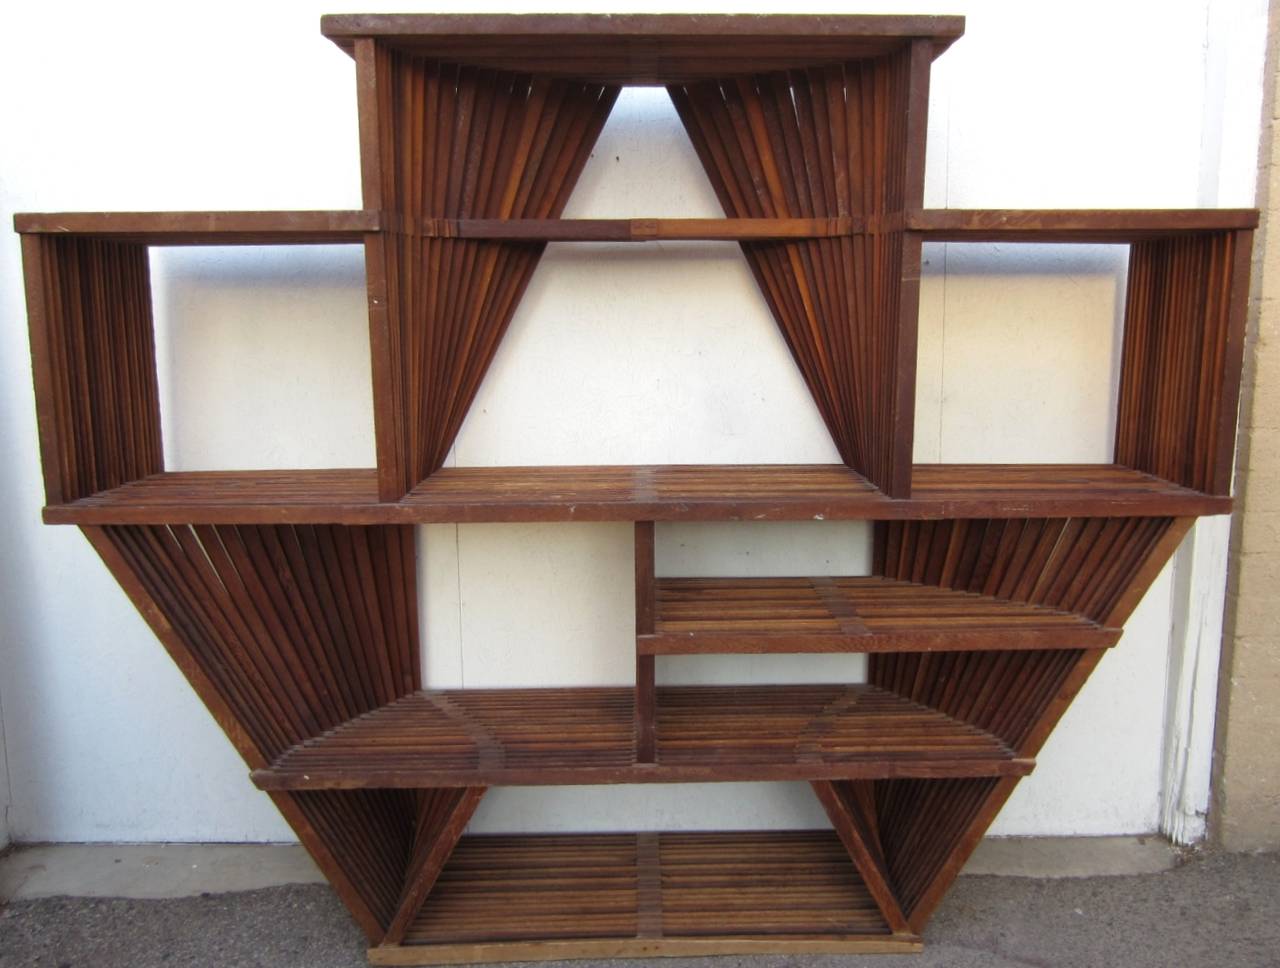 American Attributed Cliff May Architectural Industrial Postmodern Wall Unit